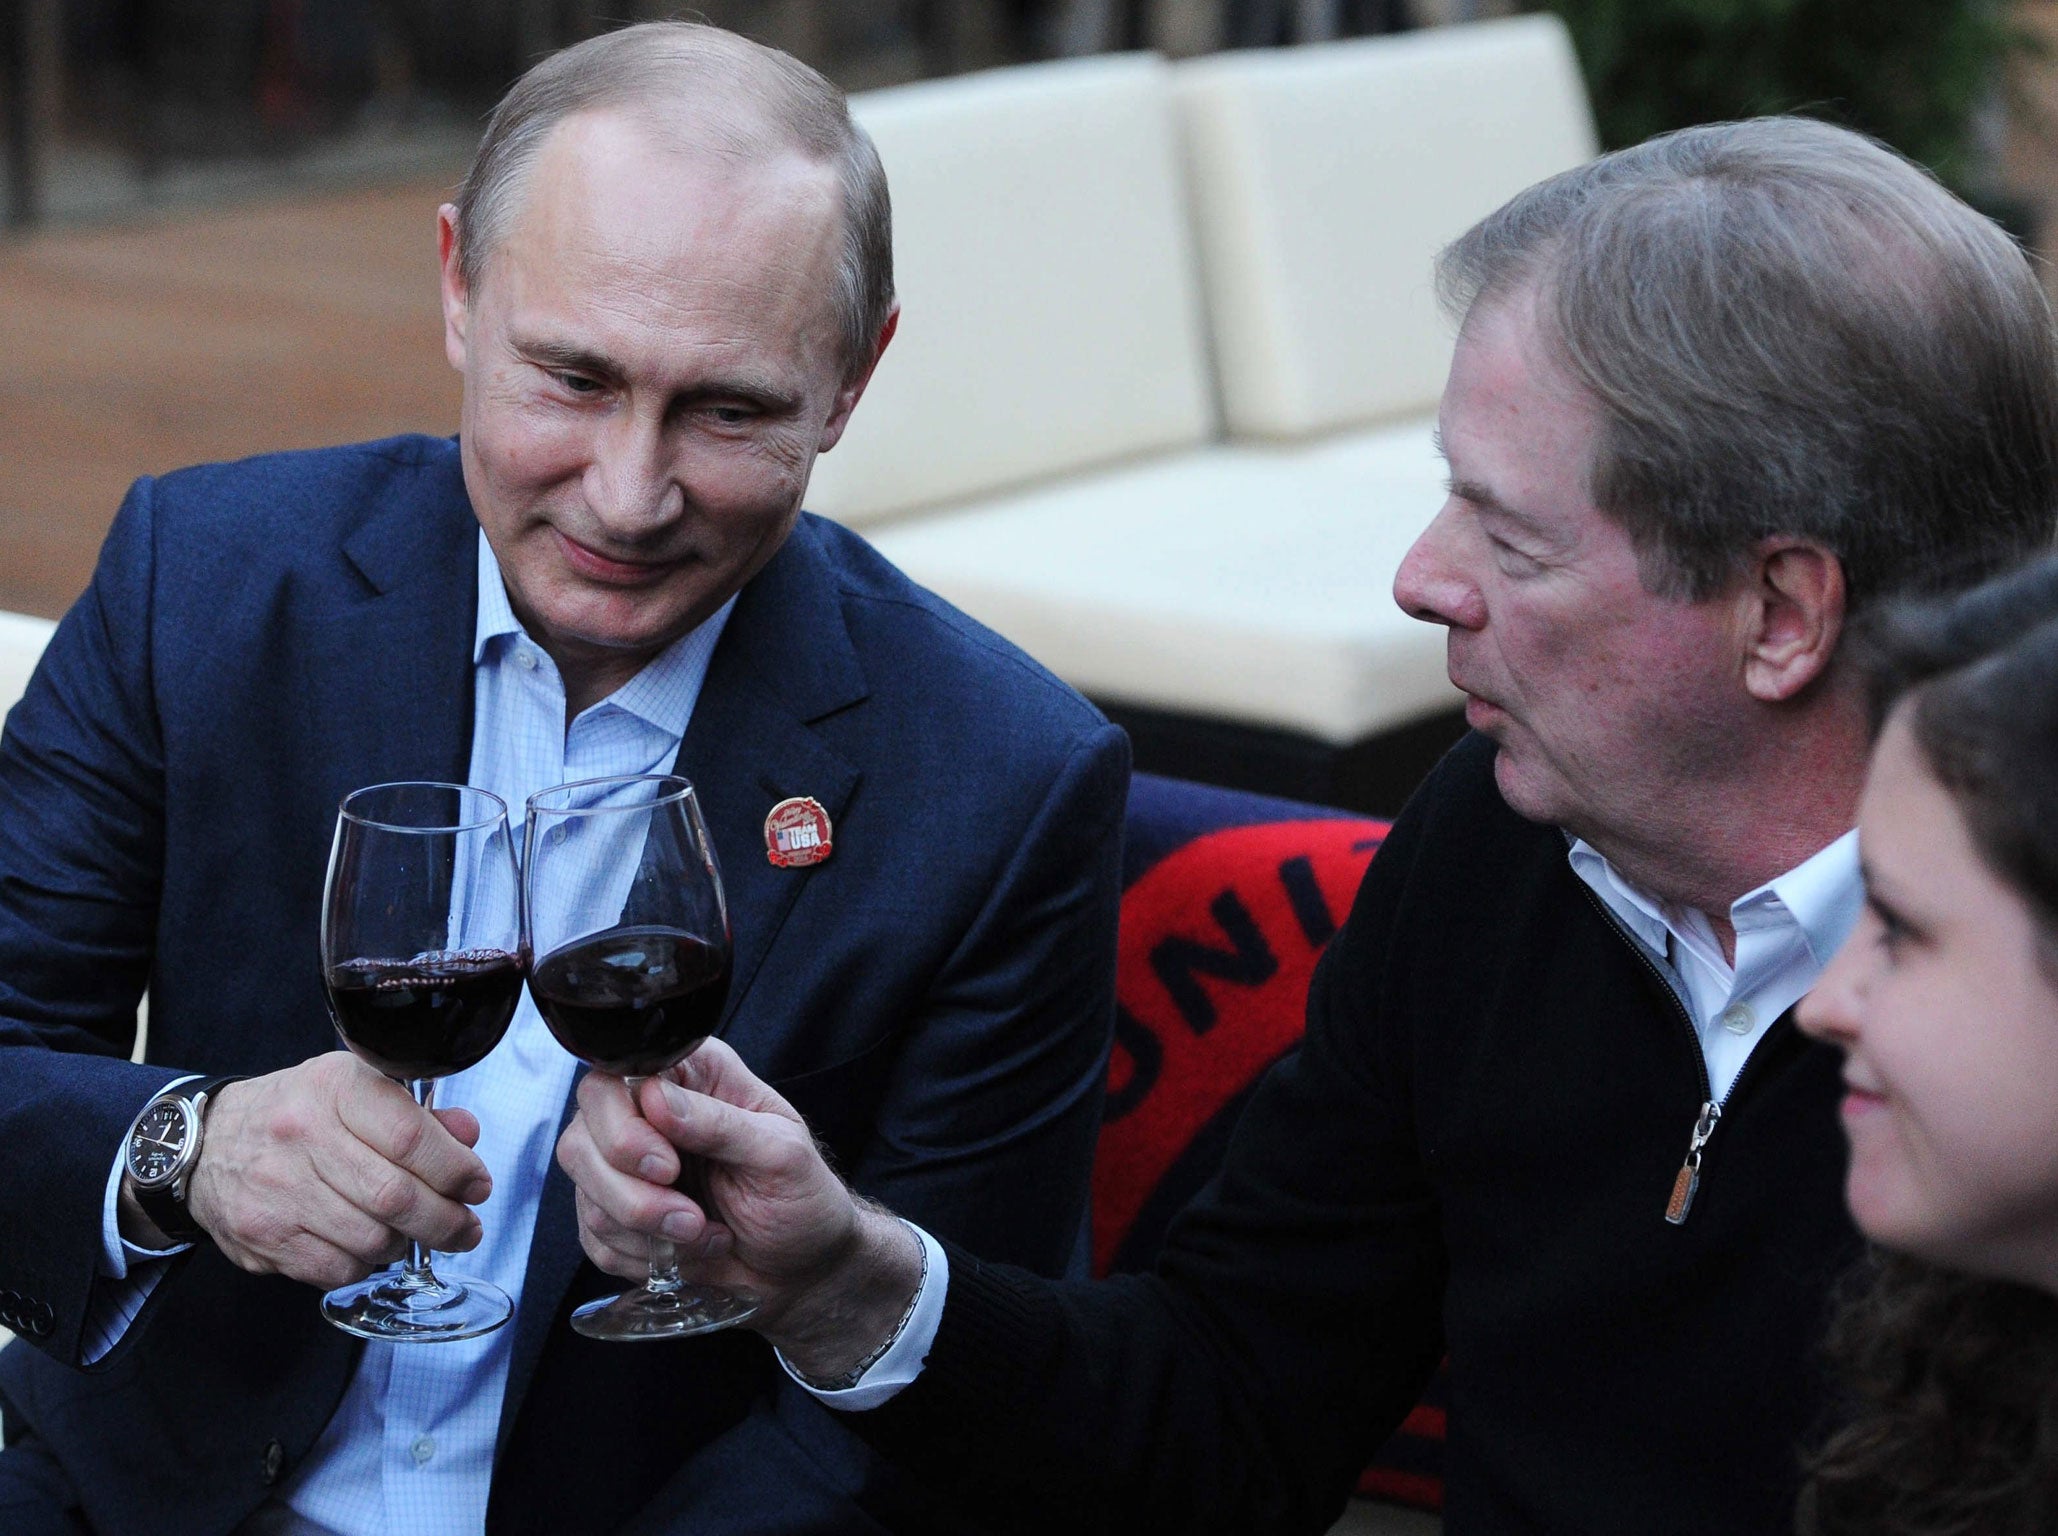 Russian President Vladimir Putin (L) toasts with Chairman of the United States Olympic Committee (USOC) Larry Probst while visiting the House of USA during the Sochi 2014 Olympic Games in Sochi, Russia, 14 February 2014